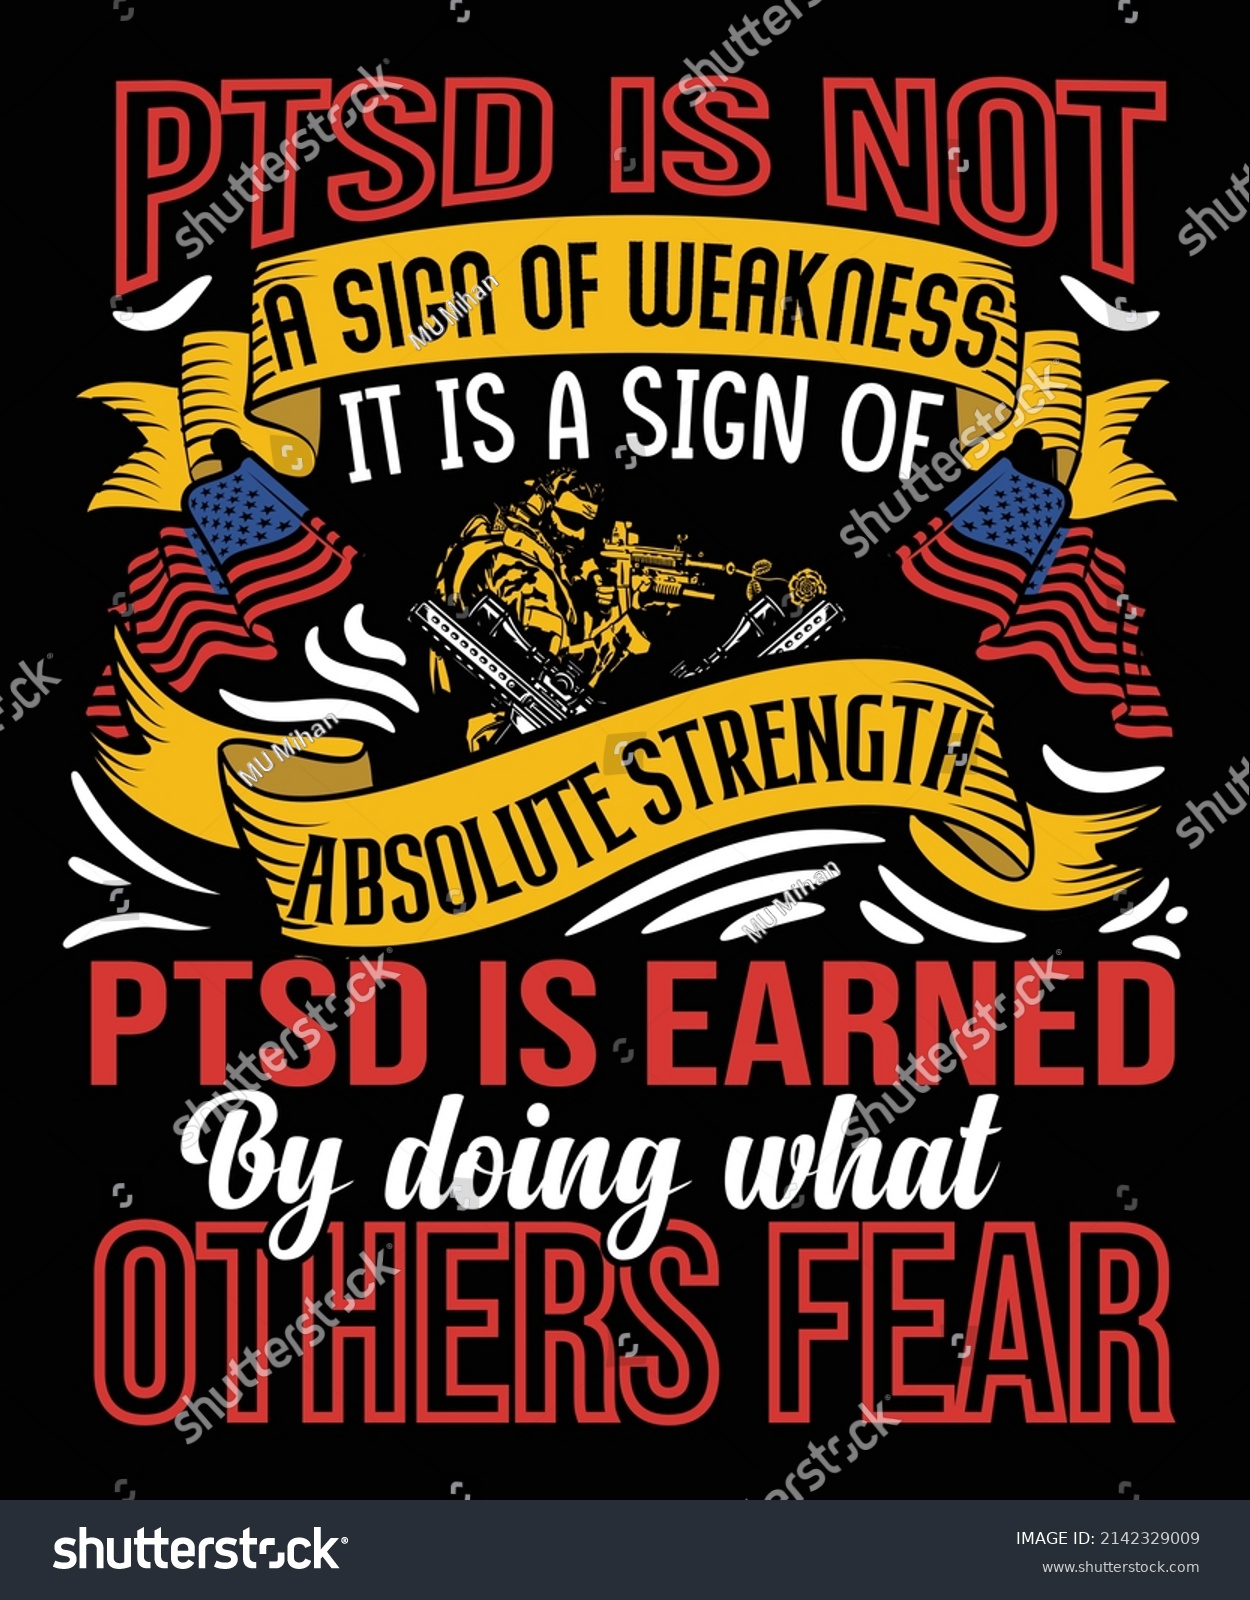 SVG of ptsd is not a sign of weakness it is a sign of absolute strength ptsd is earned by doing what others fear tshirt design weakness t shirt design veteran t shirt design svg